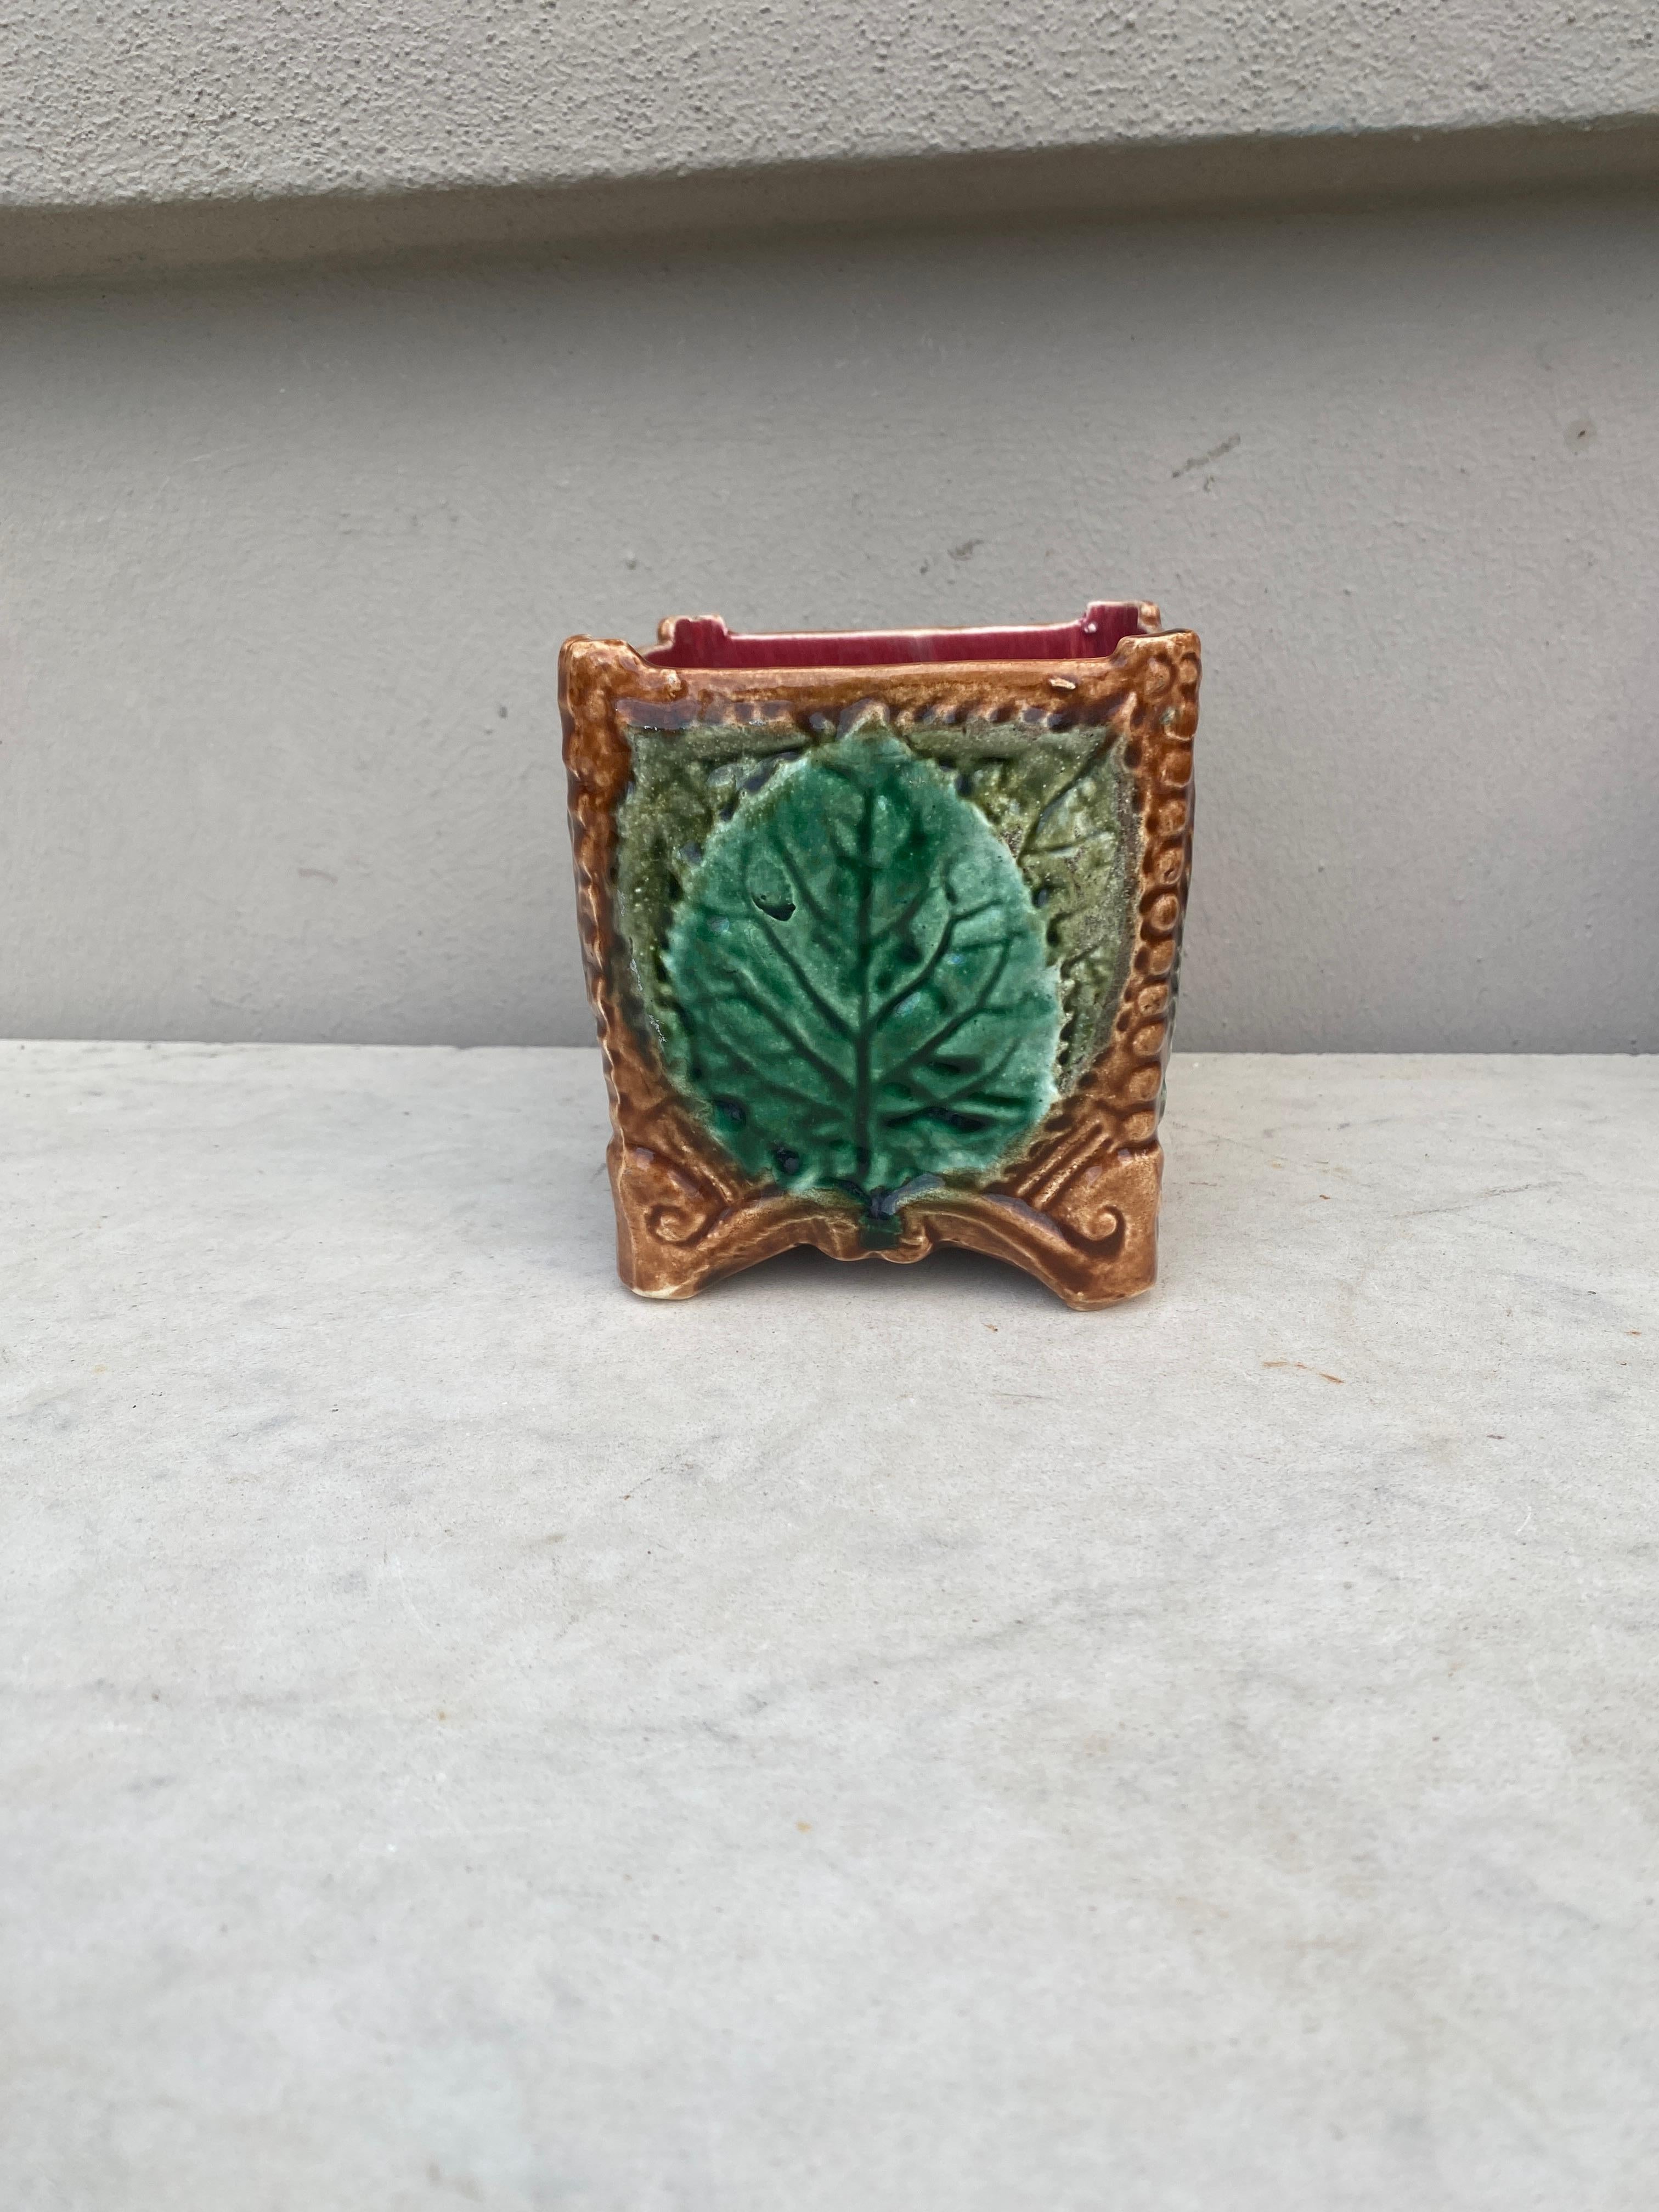 French square Majolica cache pot Onnaing, circa 1890.
Decorated with leaves.